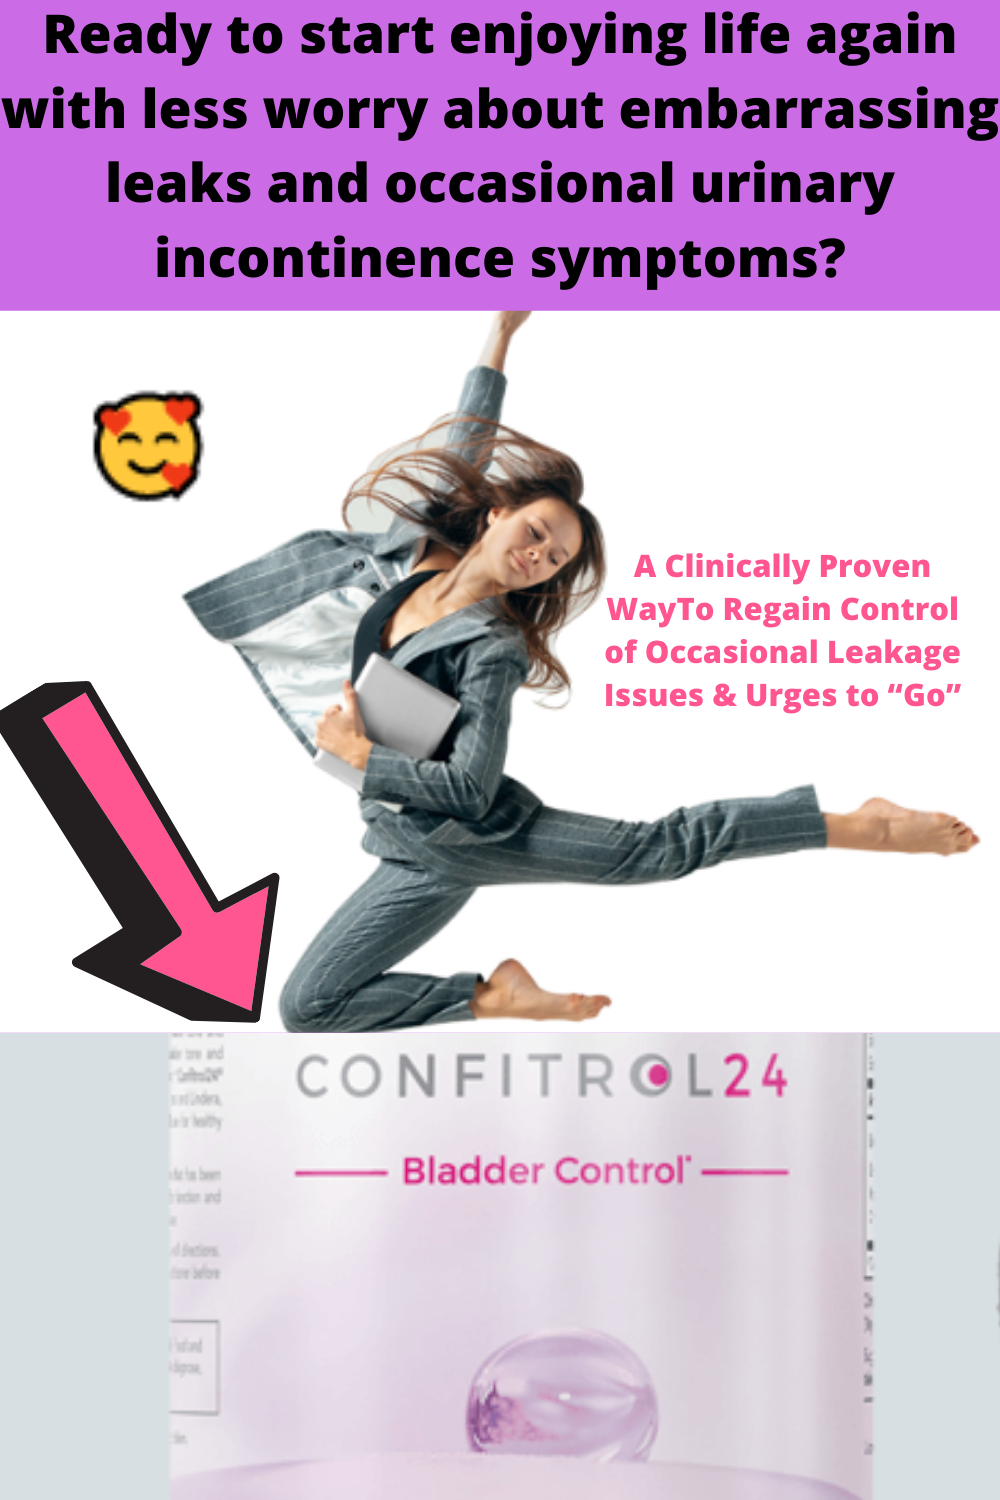 A Clinically Proven Way To Regain Control of Occasional ...